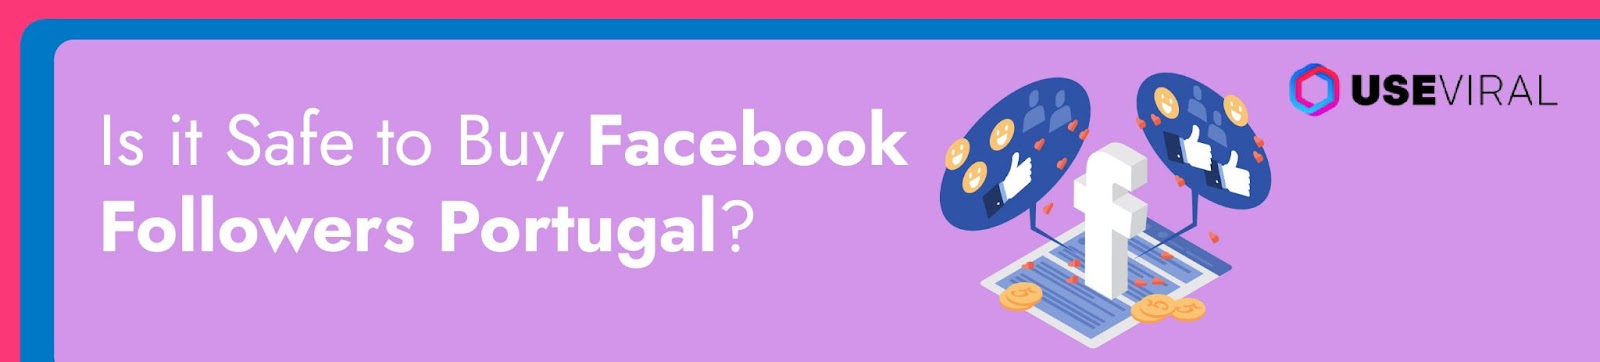 Is it Safe to Buy Facebook Followers Portugal?